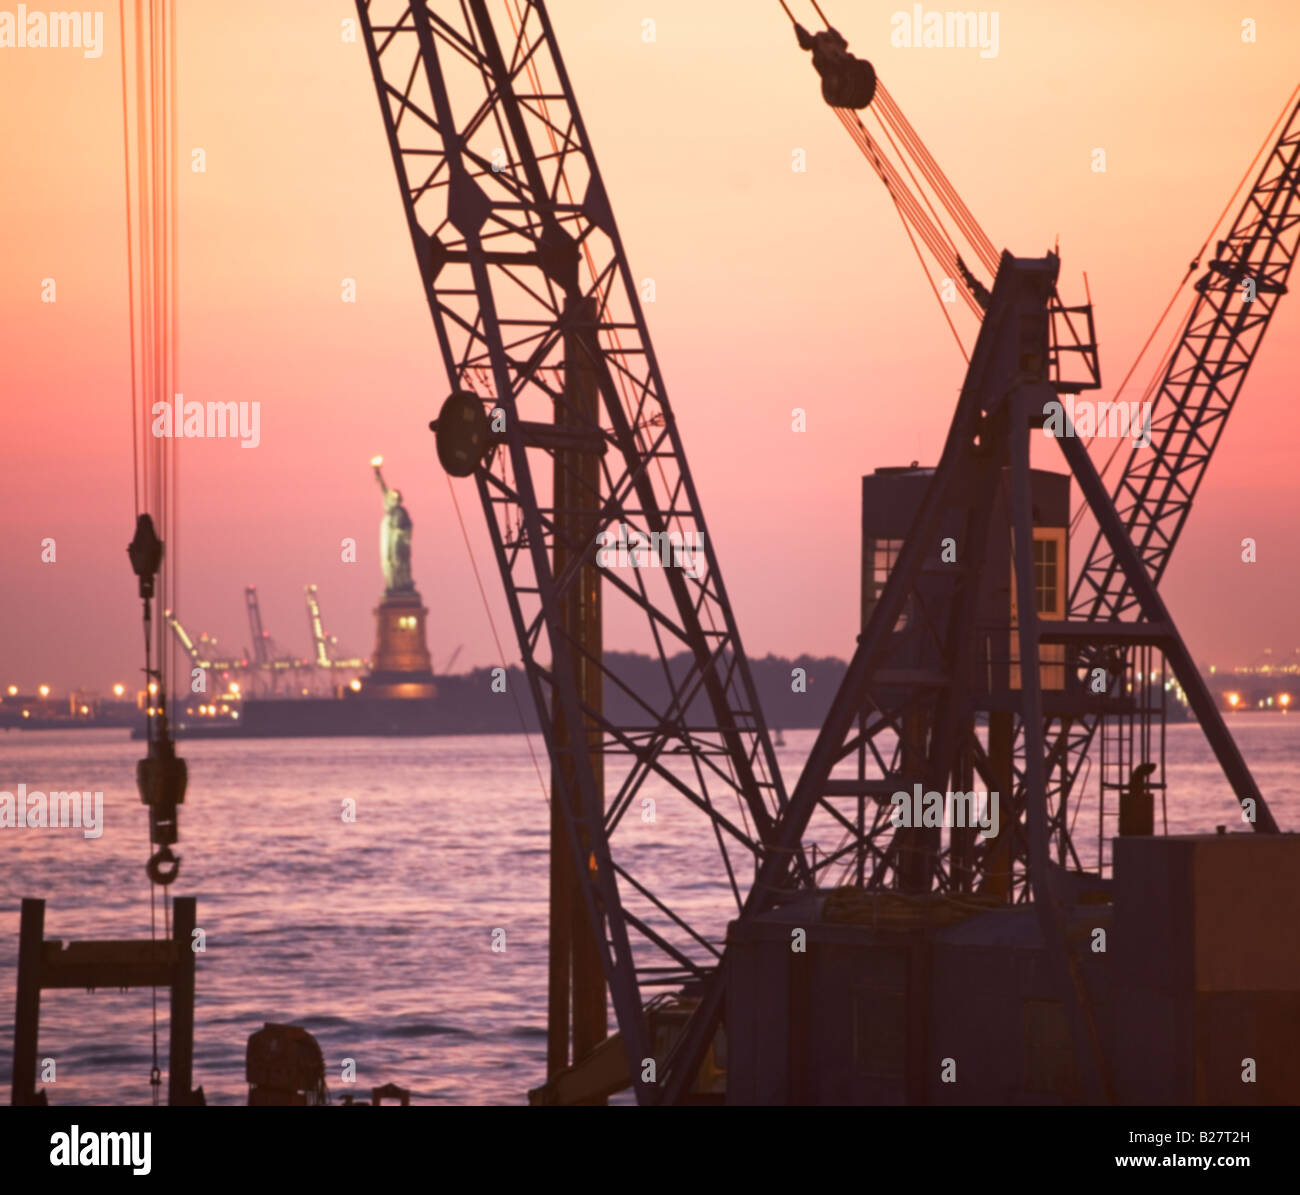 Crane with Statue of Liberty in background, New York, United States Stock Photo